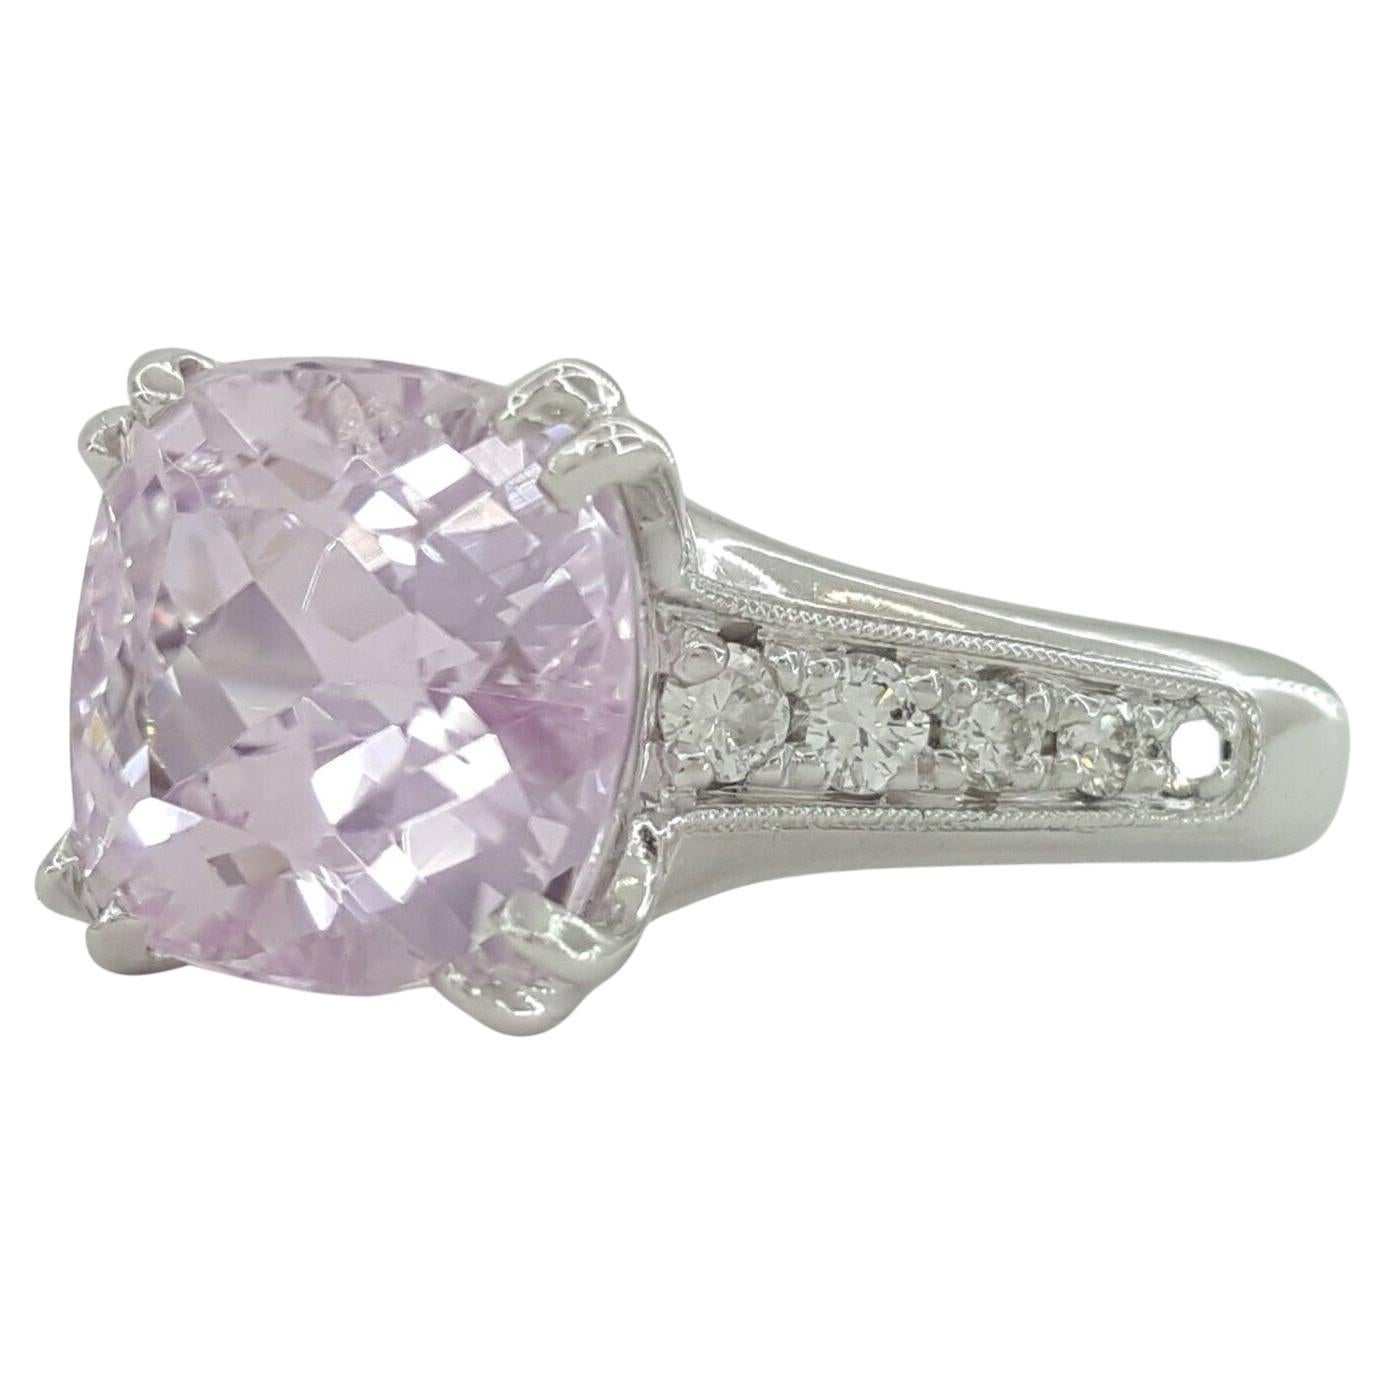 Introducing the Stunning 14K White Gold Fashion/Cocktail Ring featuring a Cushion Cut Morganite and Sparkling Round Brilliant Cut Diamonds!

Elegance and sophistication meet in this captivating piece, designed to make a statement wherever you